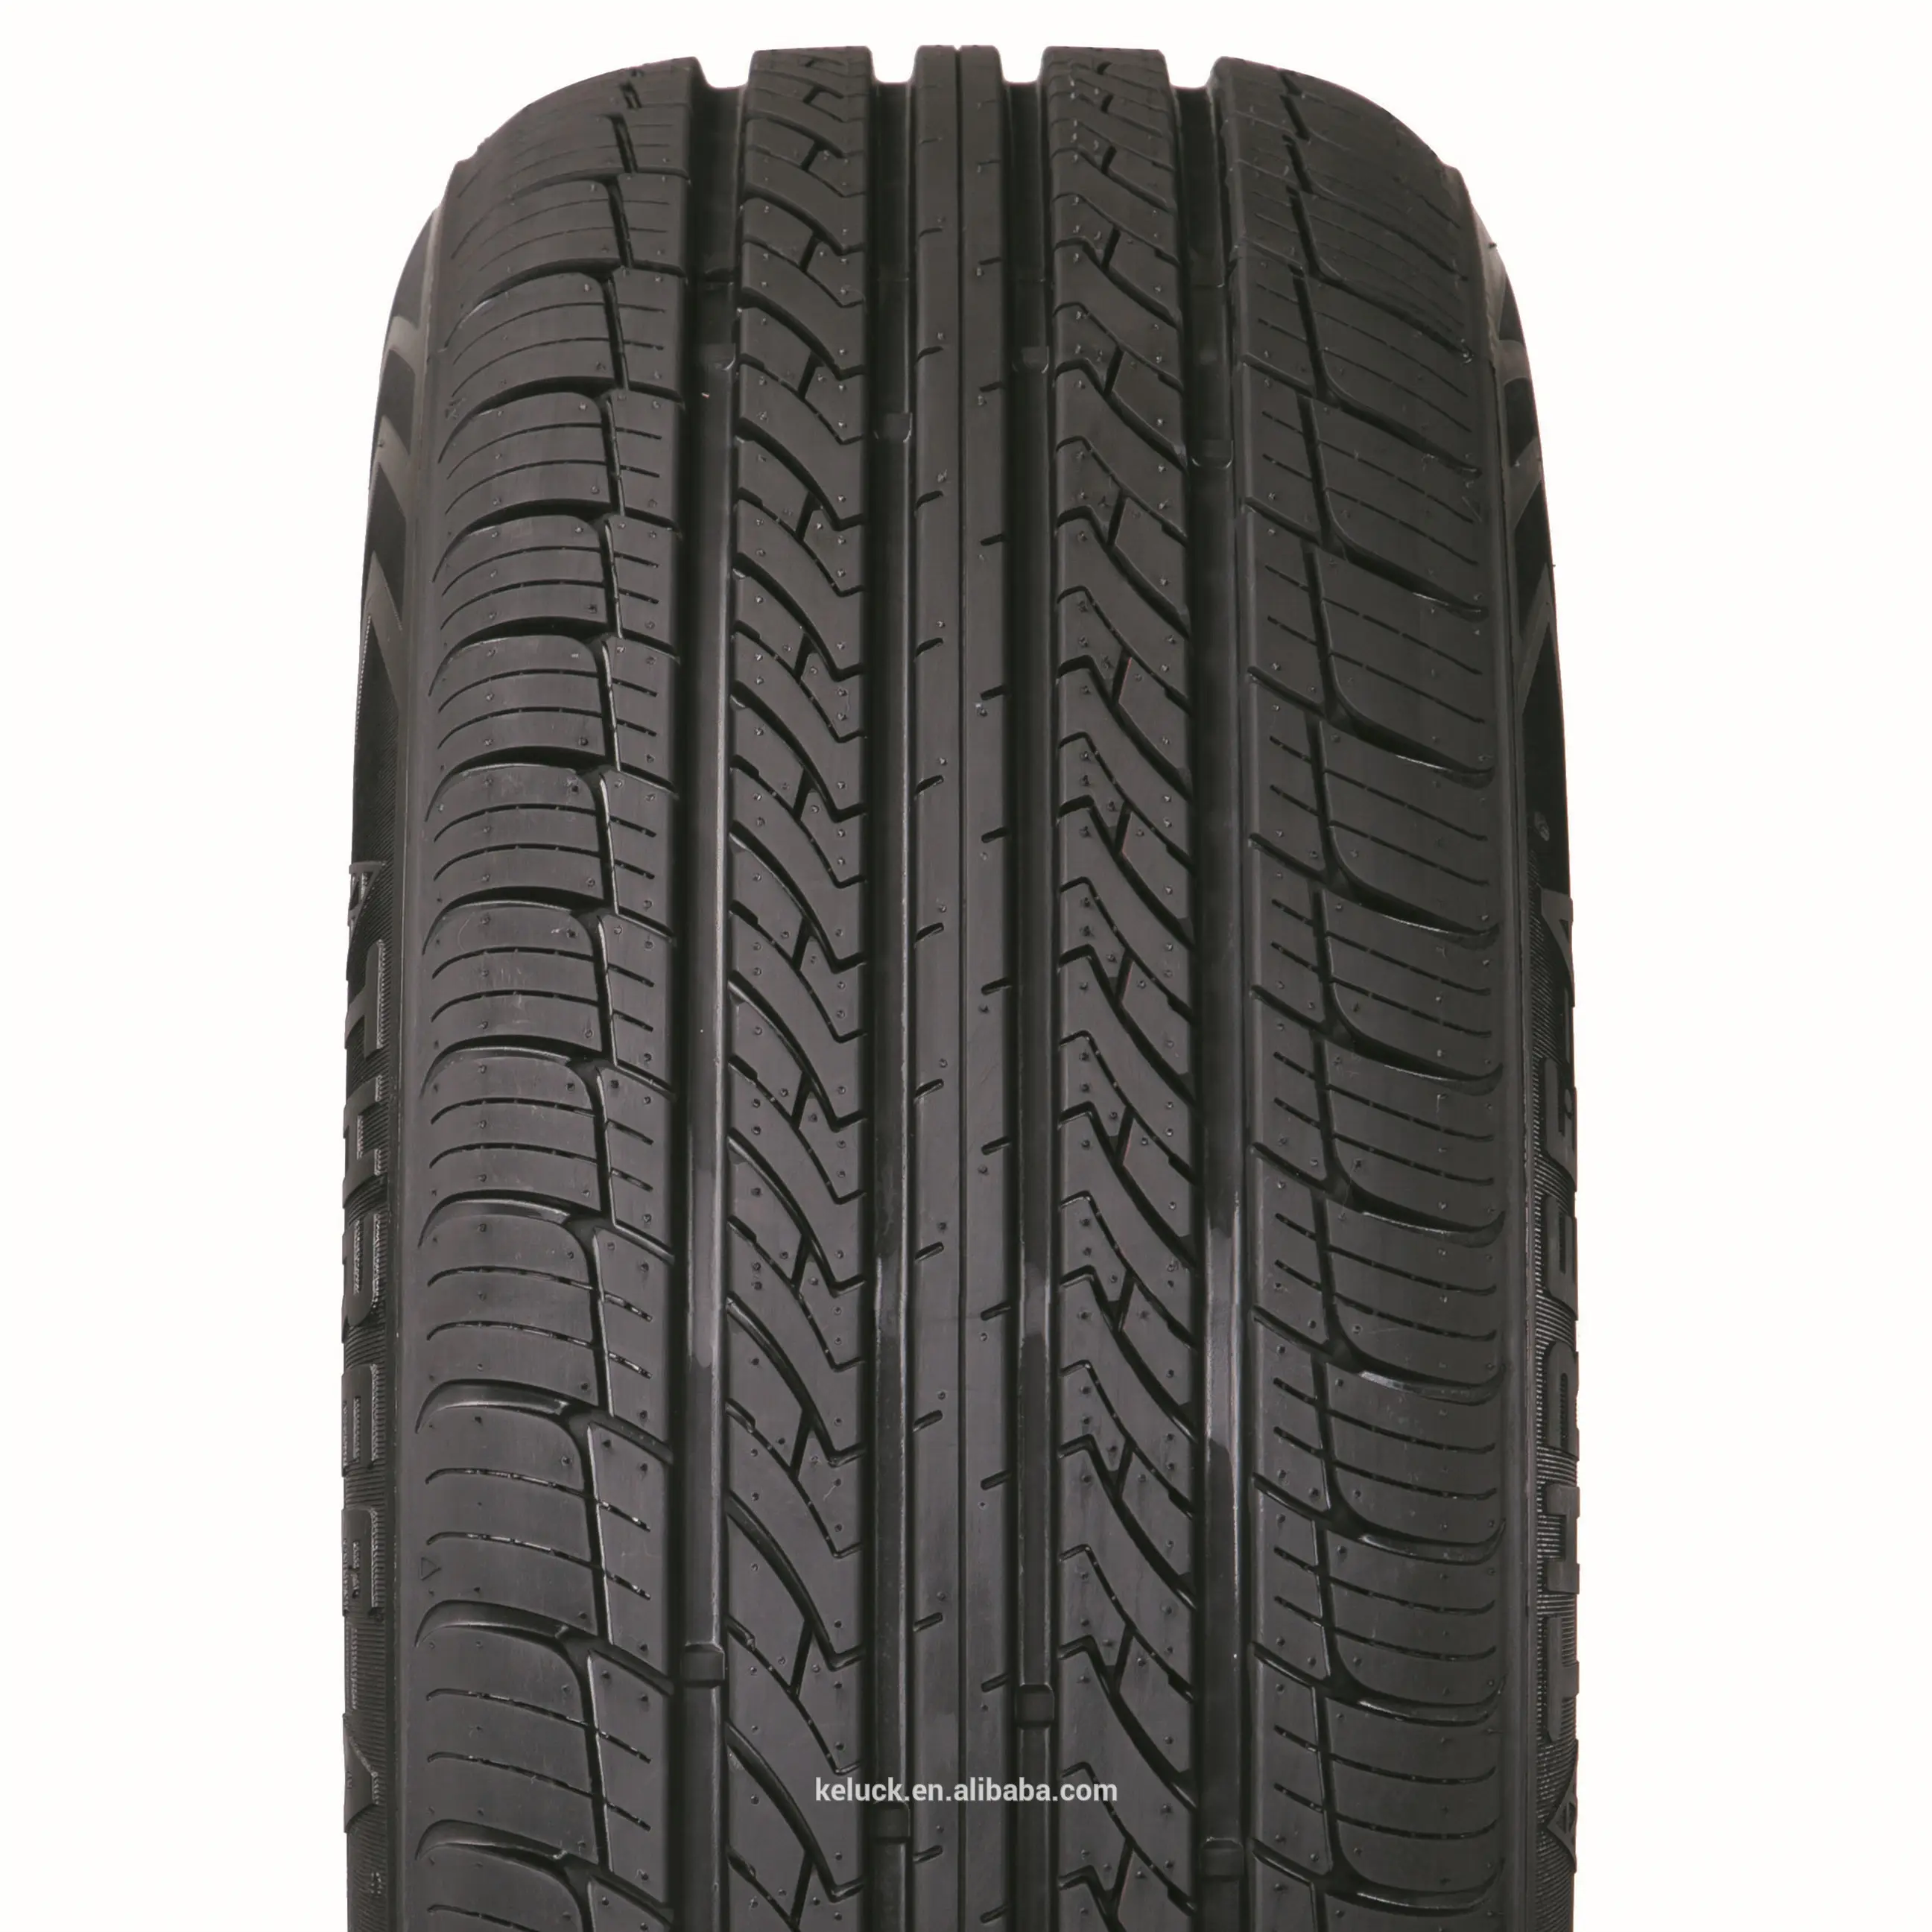 215/65R15 215 65 R 15 Wholesale cheap car tires 100% warranty high quality car tires hot selling Shengtai Three-A Rapid tyres